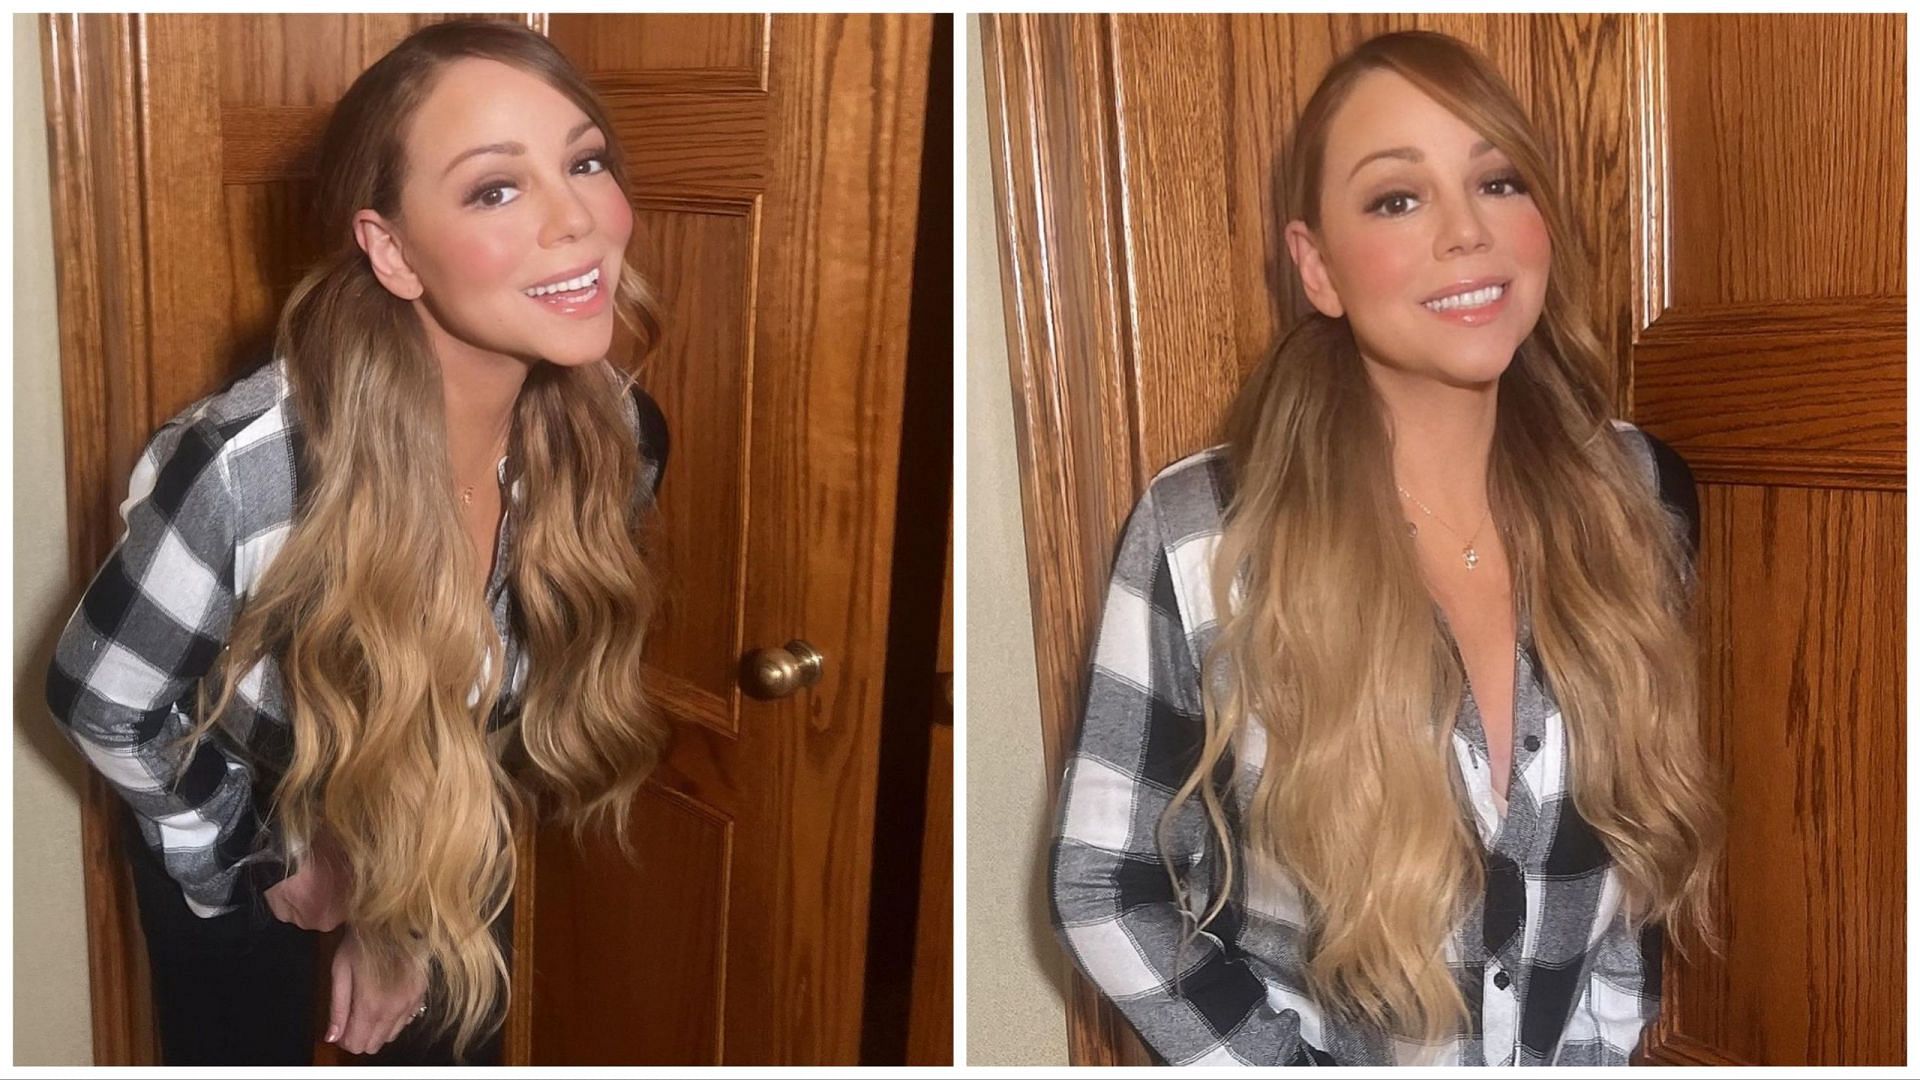 Mariah Carey Coming to Philly, PA to Celebrate the Christmas